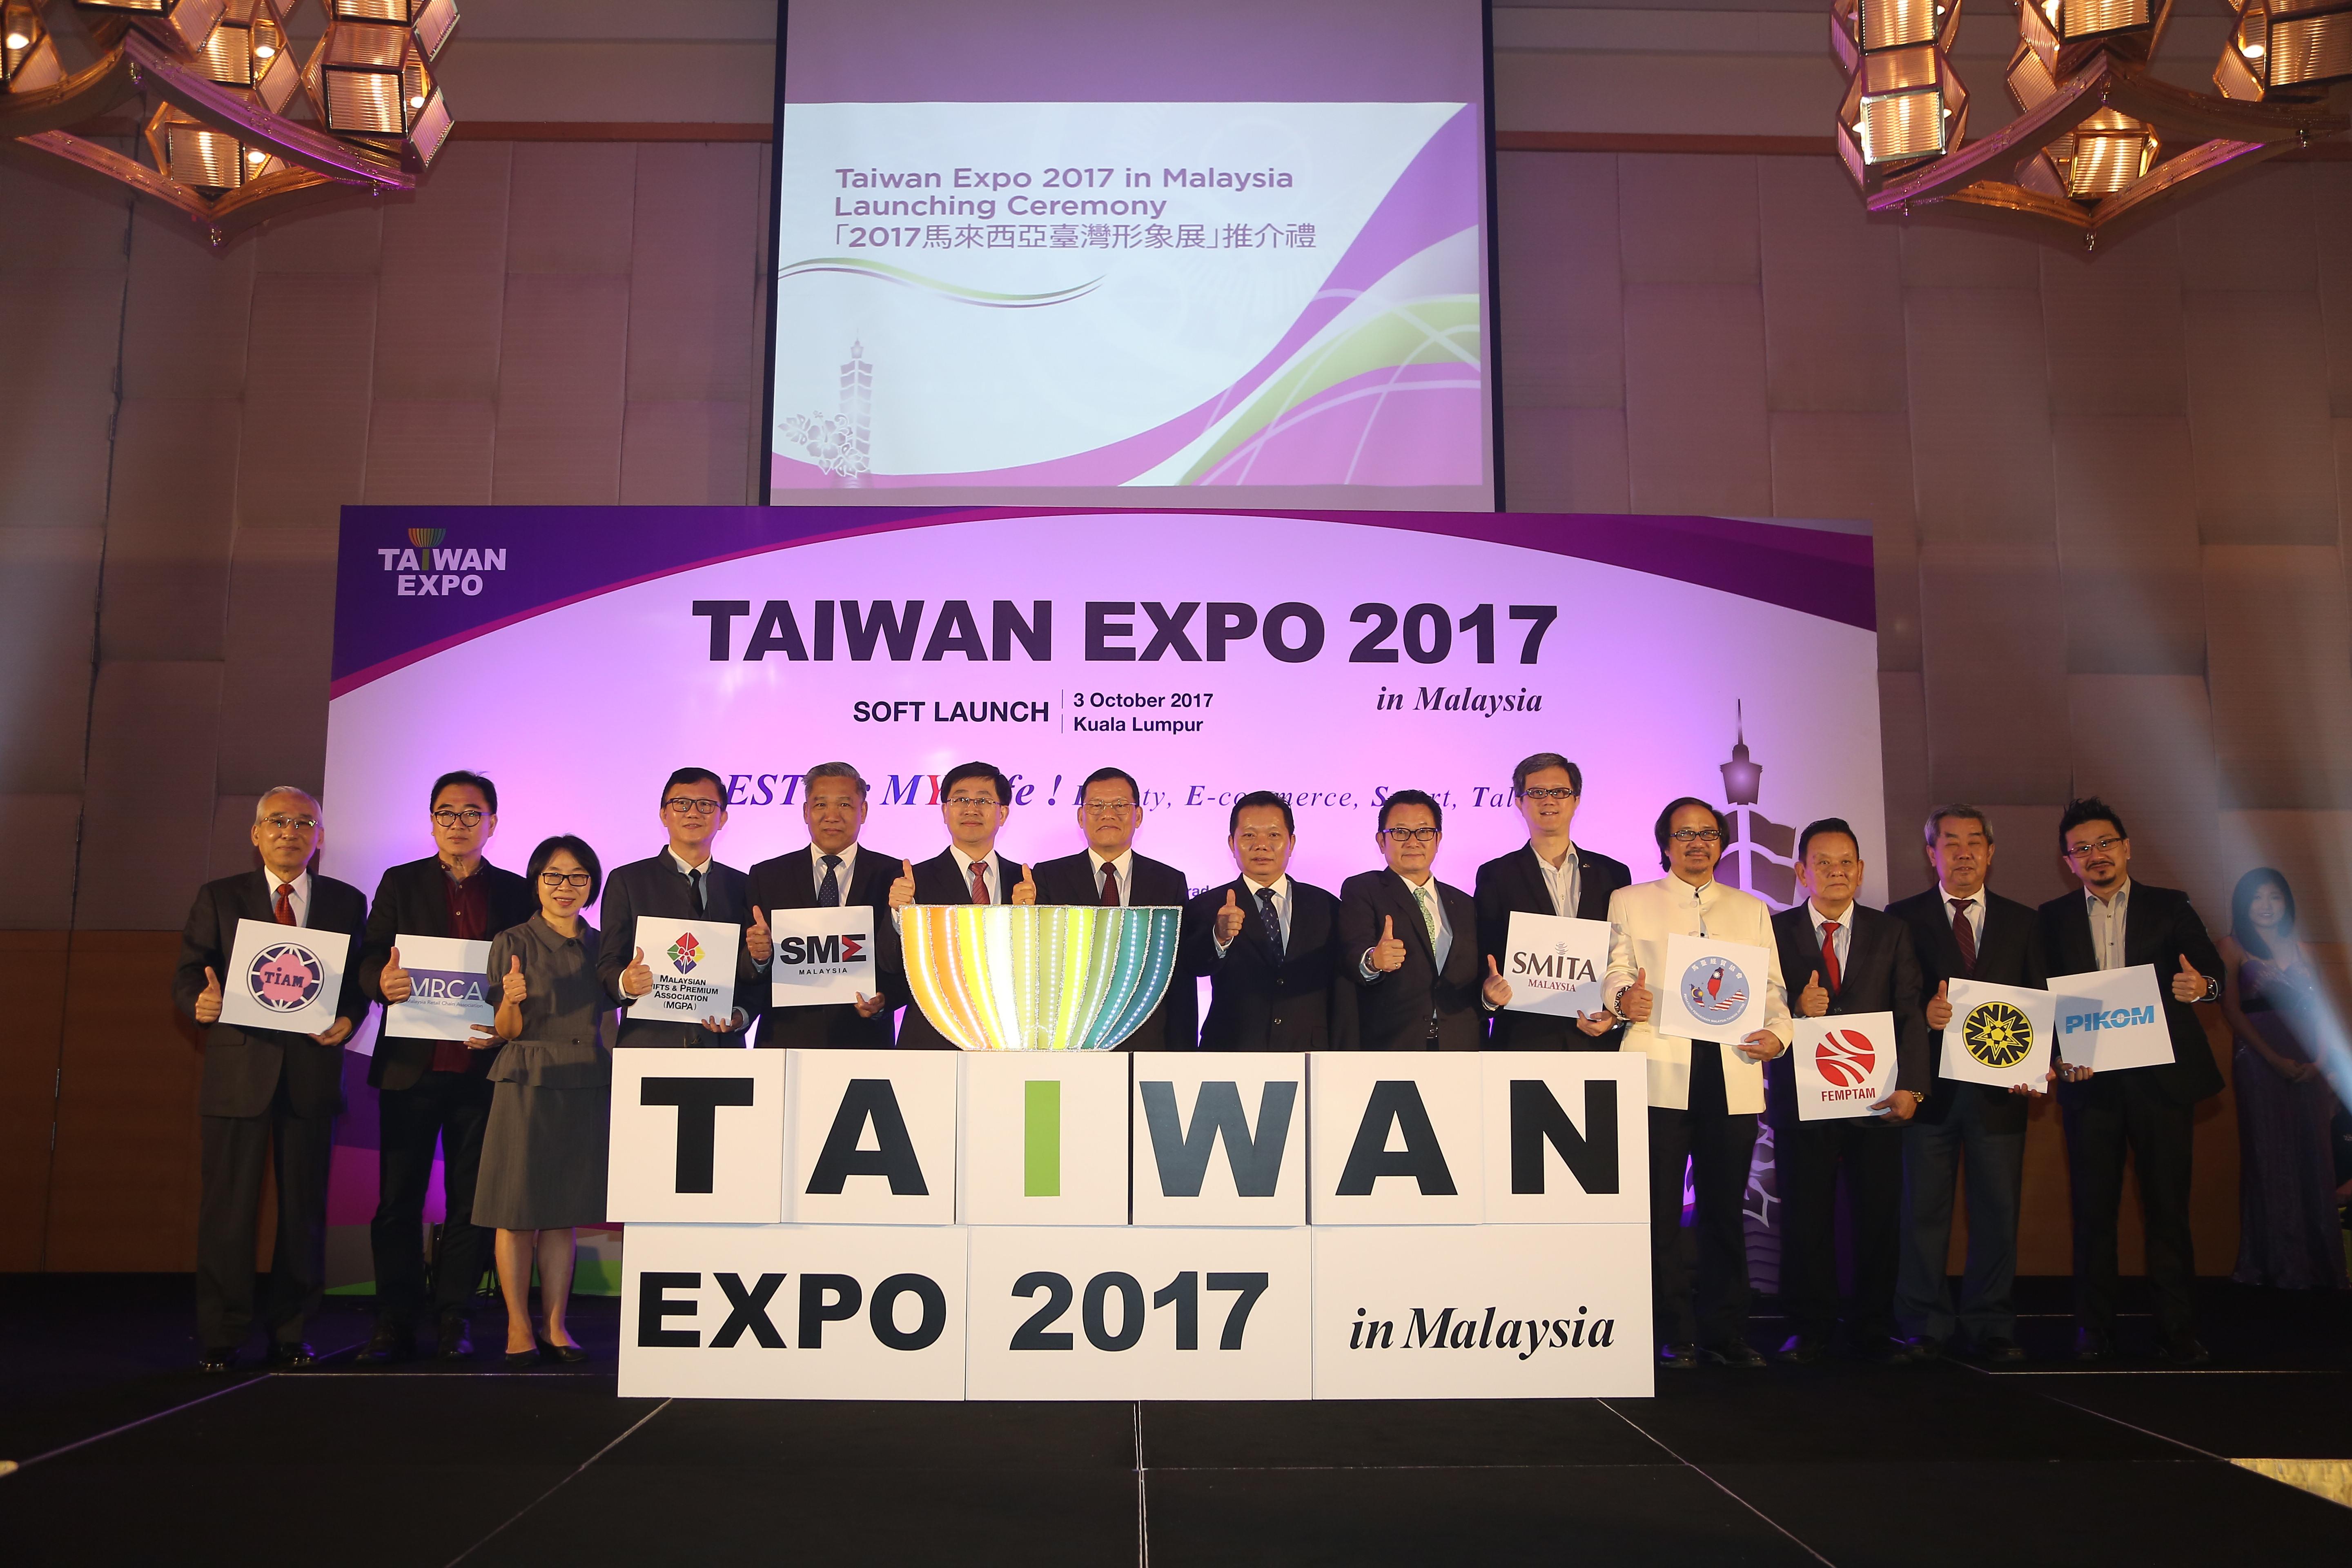 Representative Chang, James Chi-ping (7th from left) attends the Taiwan Expo 2017 in Malaysia Soft Launch at Pullman Hotel Kuala Lumpur on October 3, 2017